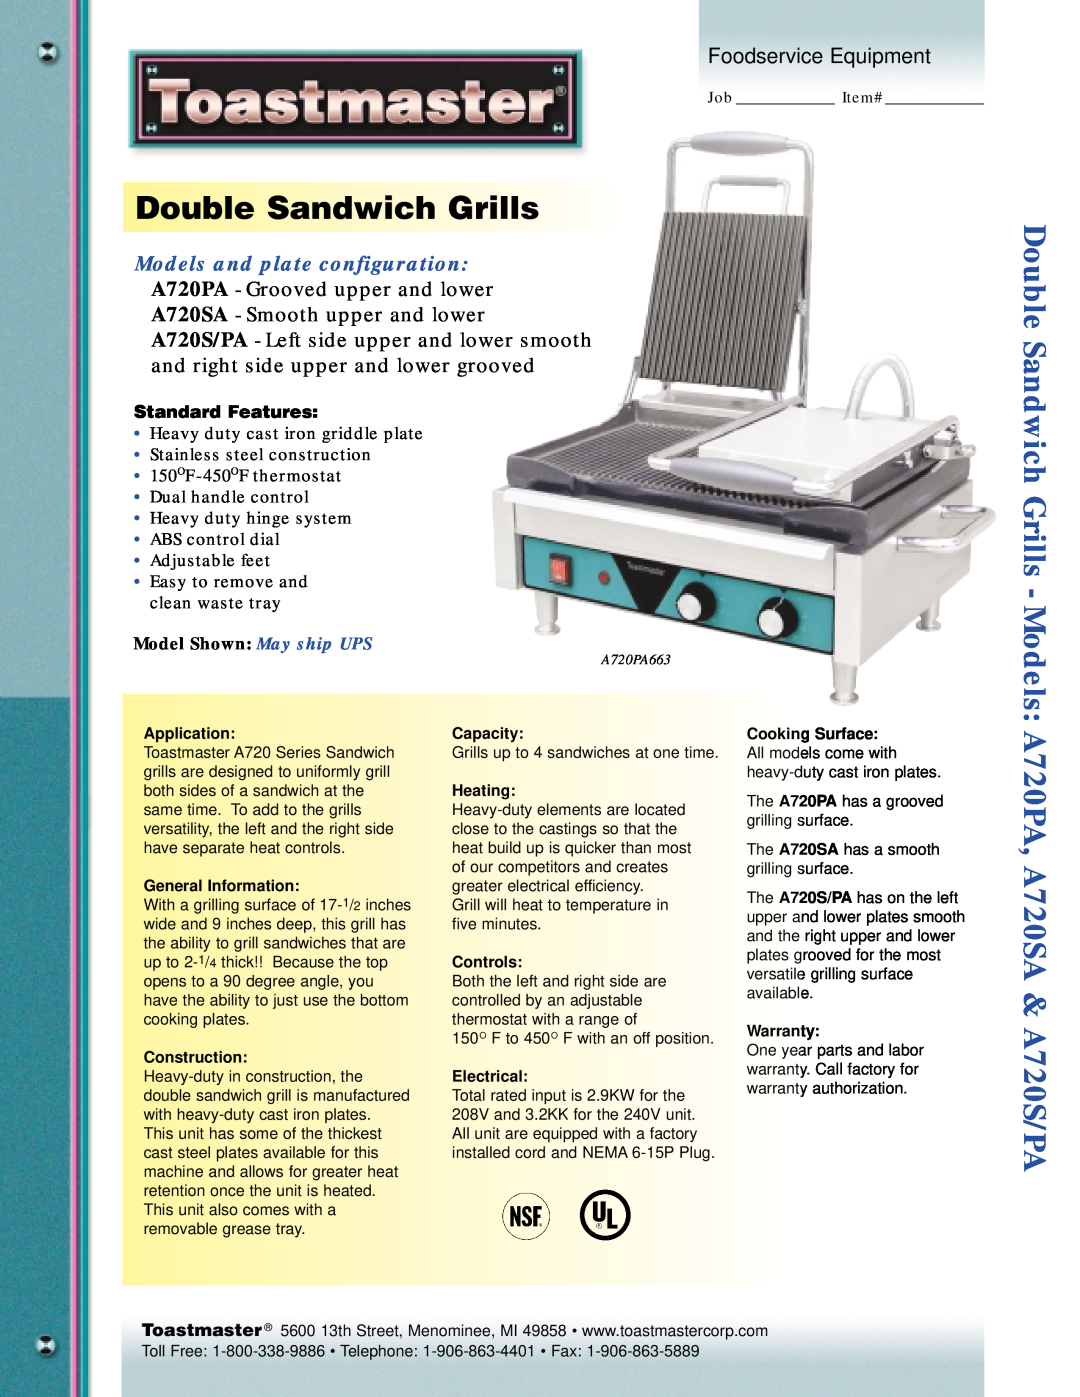 Toastmaster A720SA warranty DoubleSandwichGrills, Standard Features, Application, General Information, Construction 